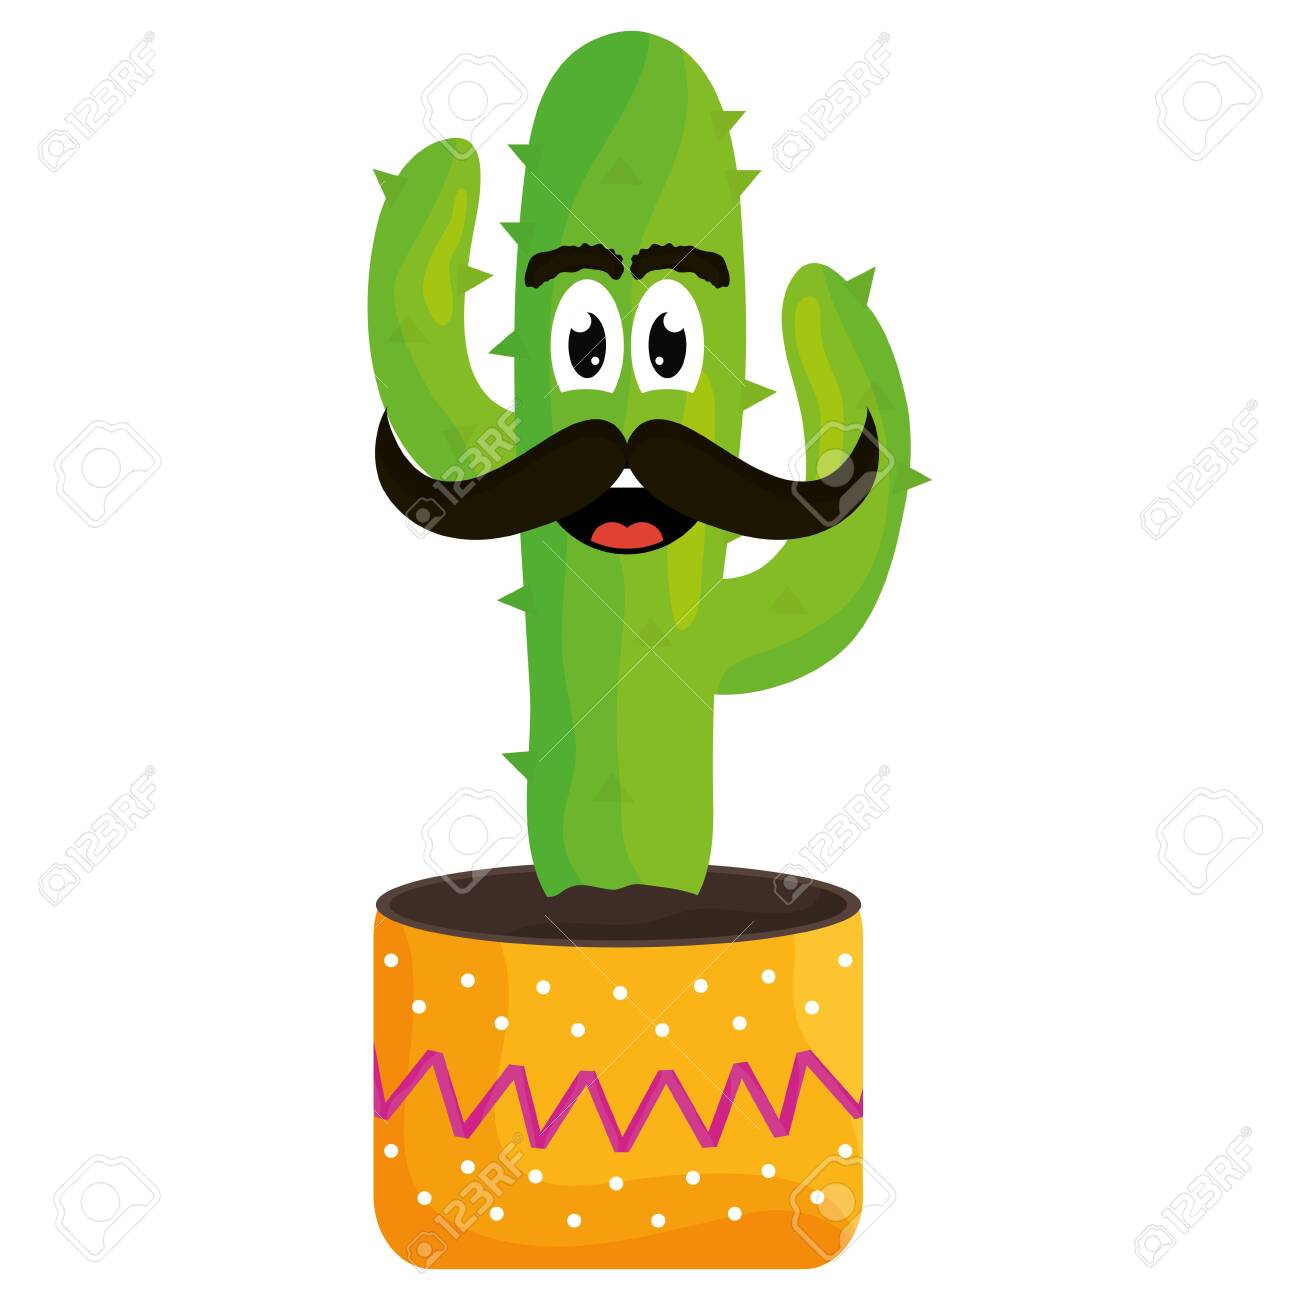 122804938-mexican-cactus-with-mustache-emoji-character-vector-illustration-design.jpg